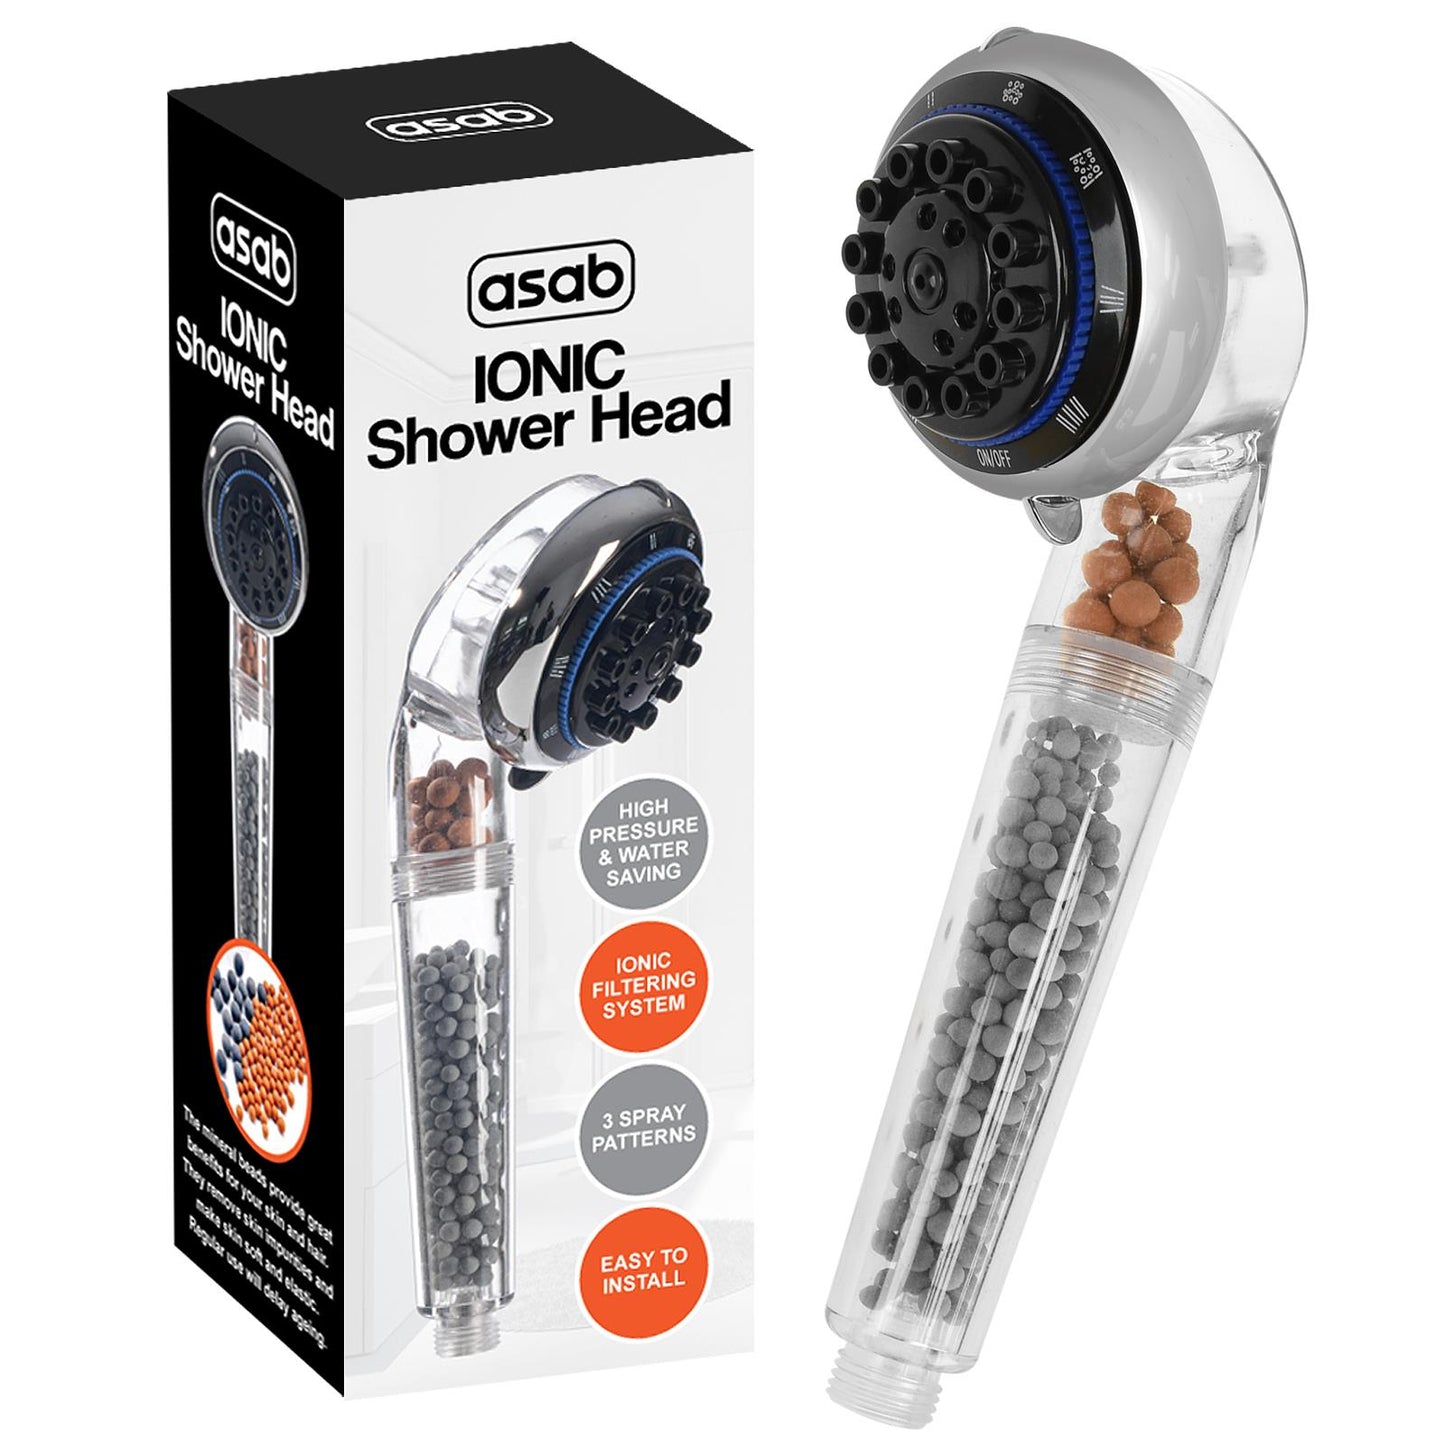 Showerhead With High Pressure And Ionic Filtration System